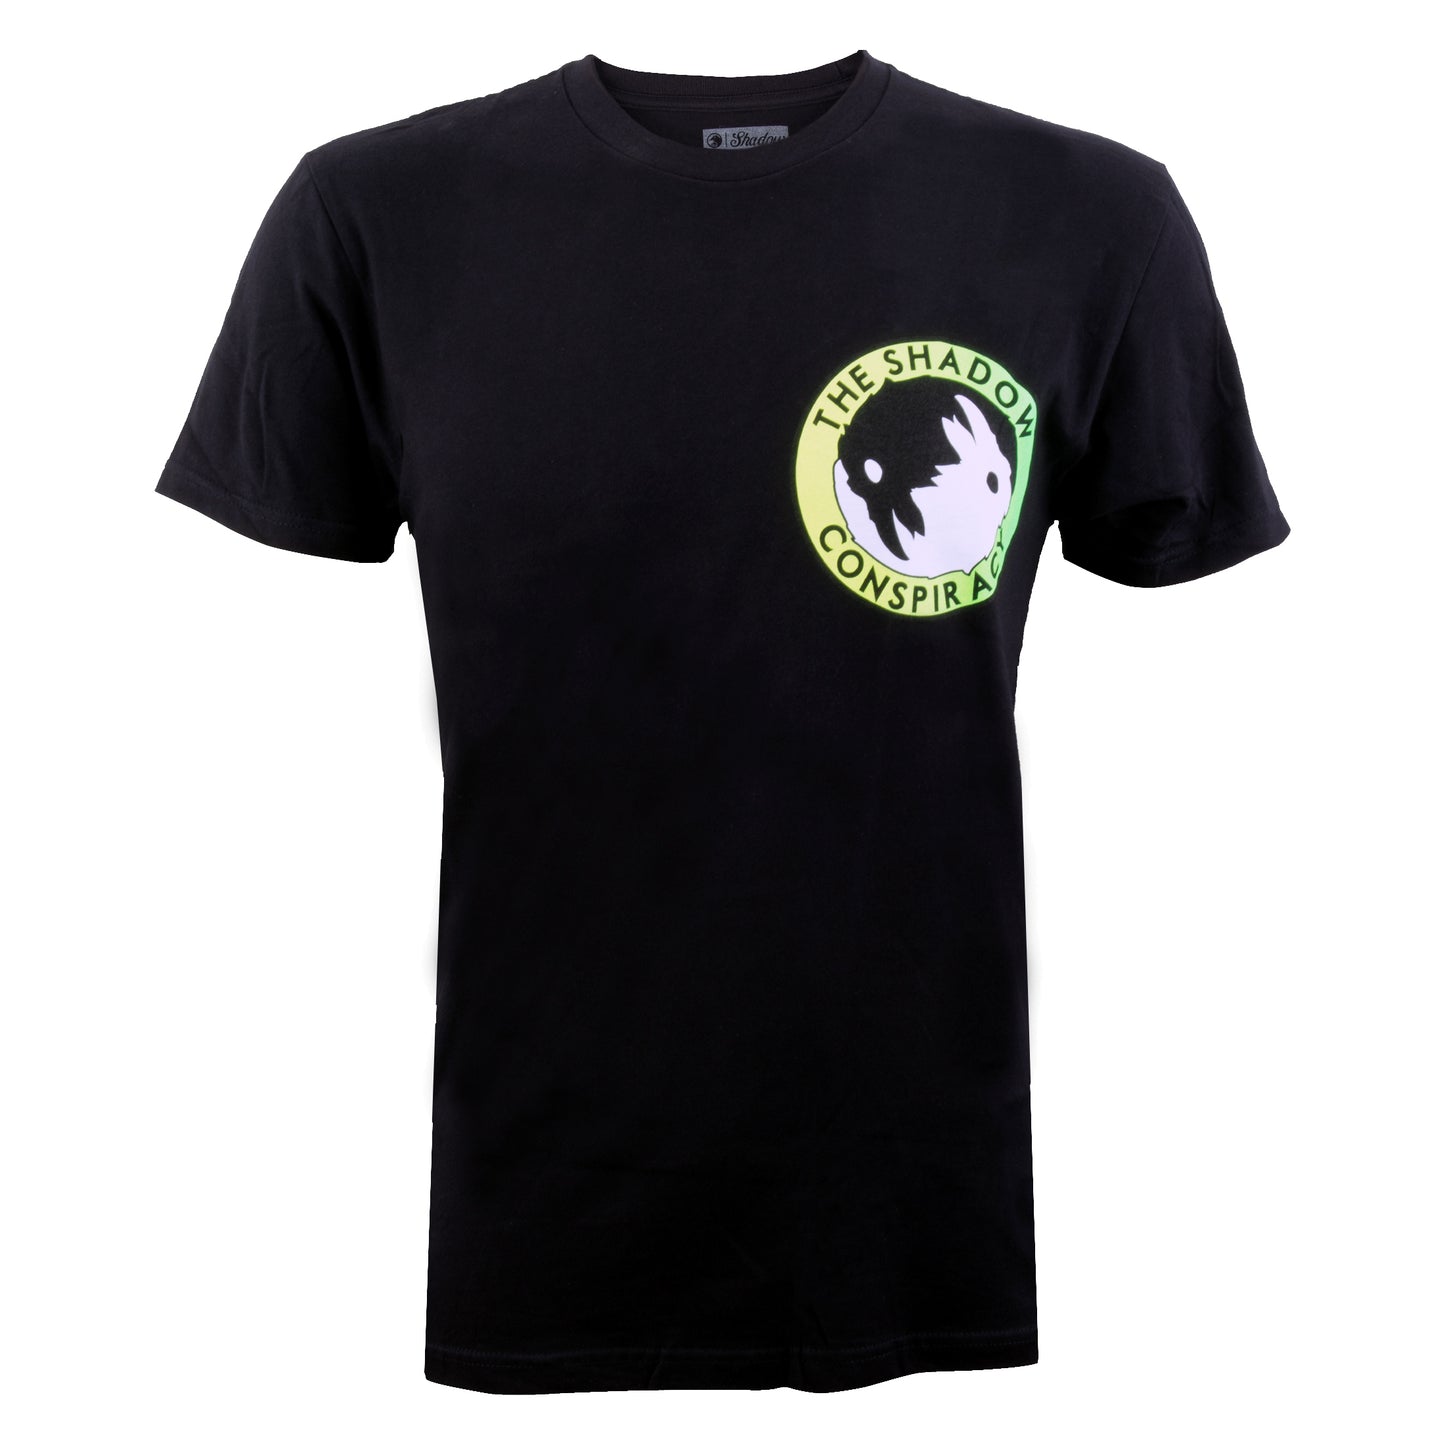 The Shadow Conspiracy Shirts